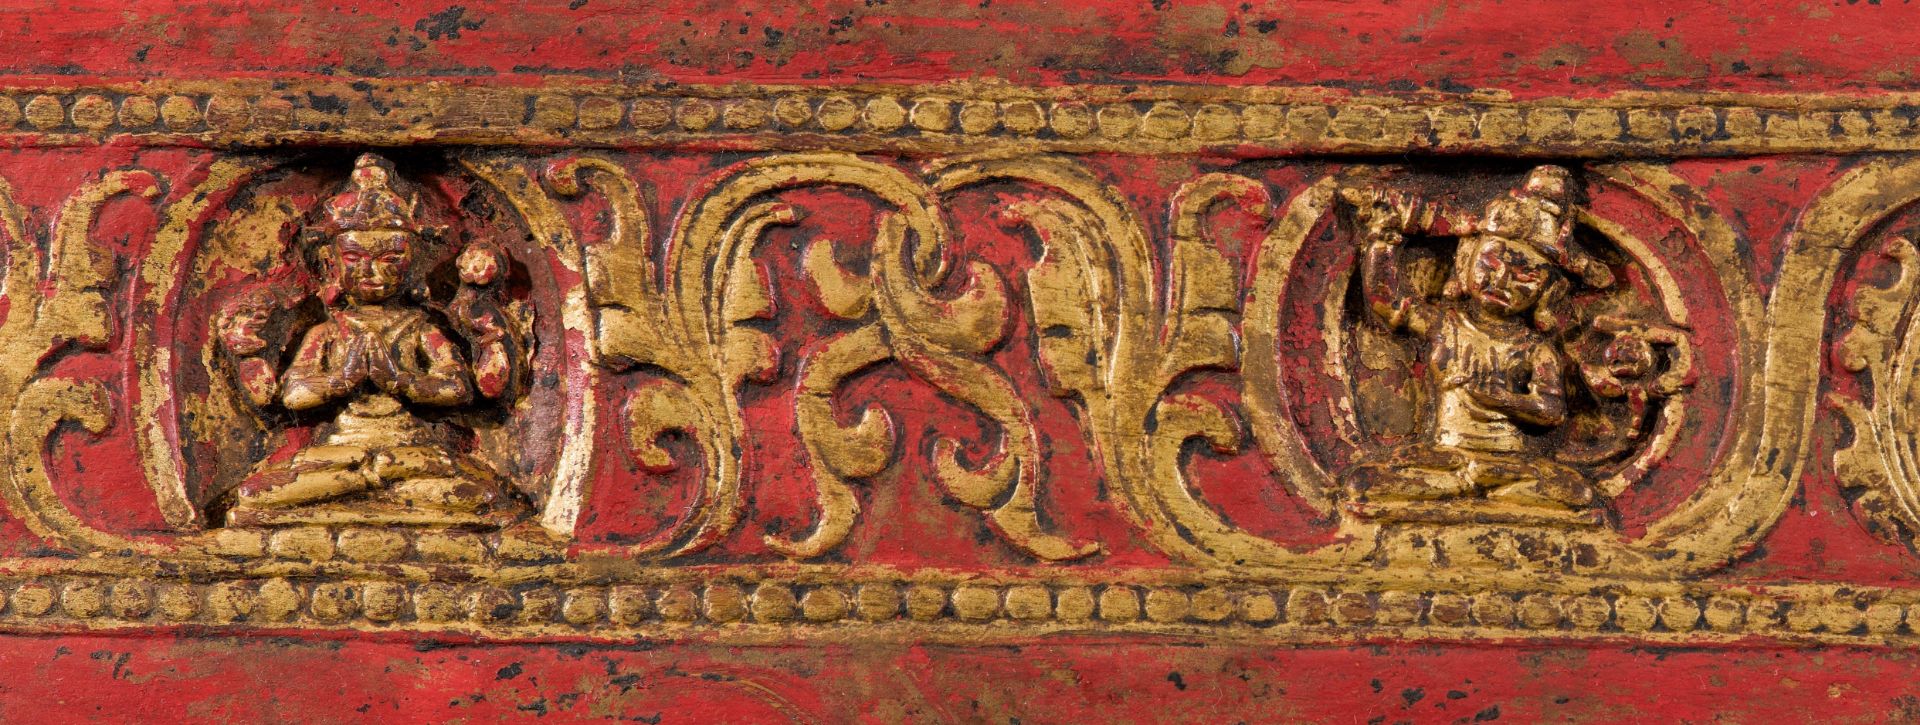 A RED AND GOLD PAINTED MANUSCRIPT COVER. - Image 2 of 2